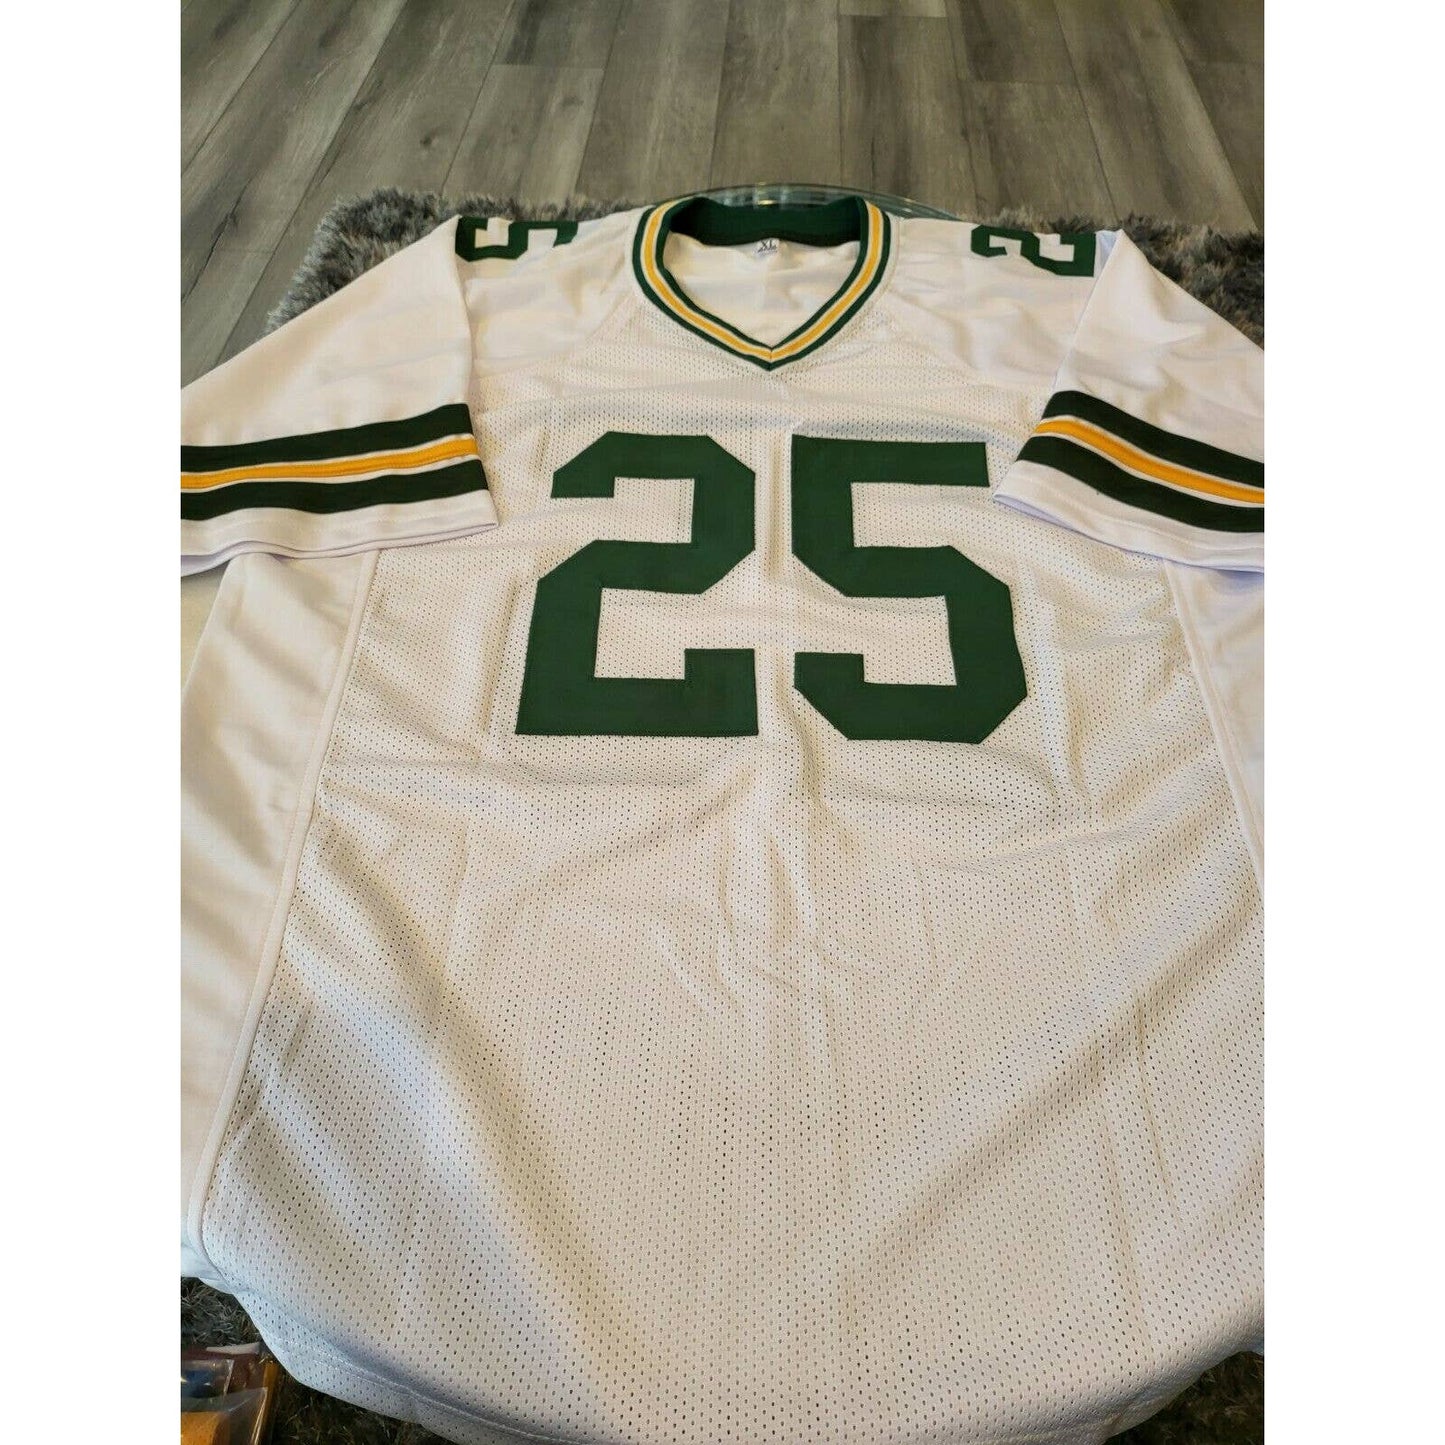 Dorsey Levens Autographed/Signed Jersey Beckett Sticker Green Bay Packers Legend - TreasuresEvolved